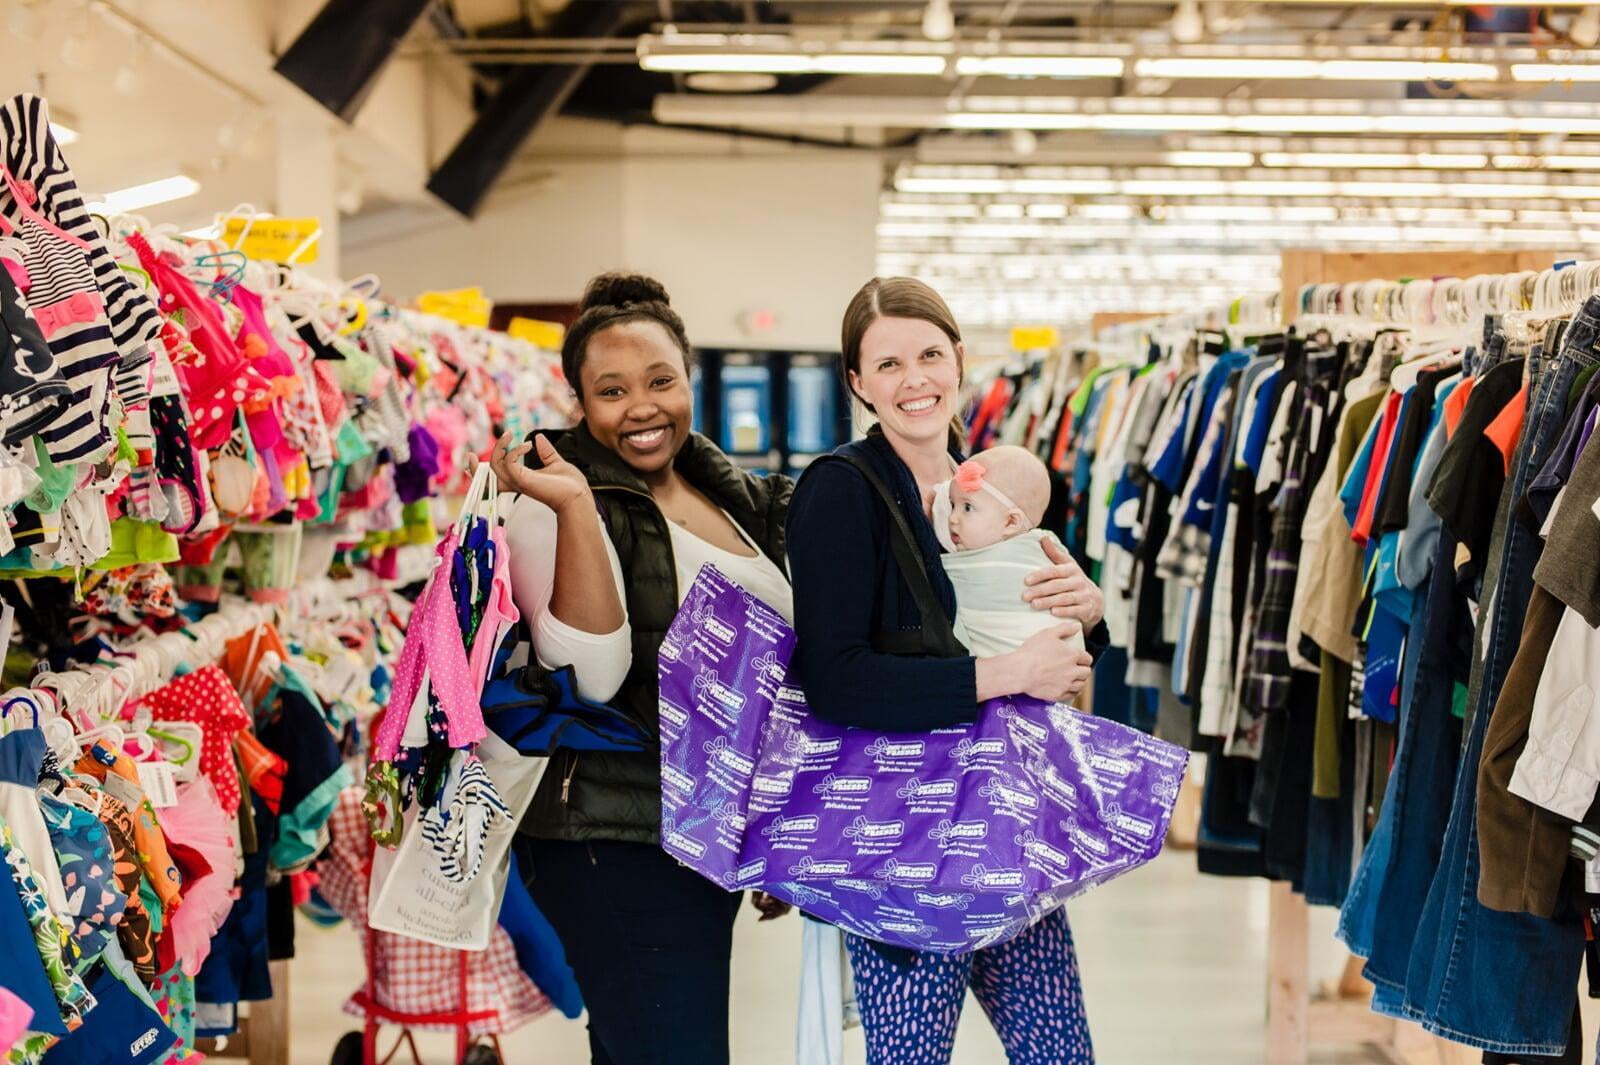 Three young girls are excited to shop together in the toy section of their local JBF sale.